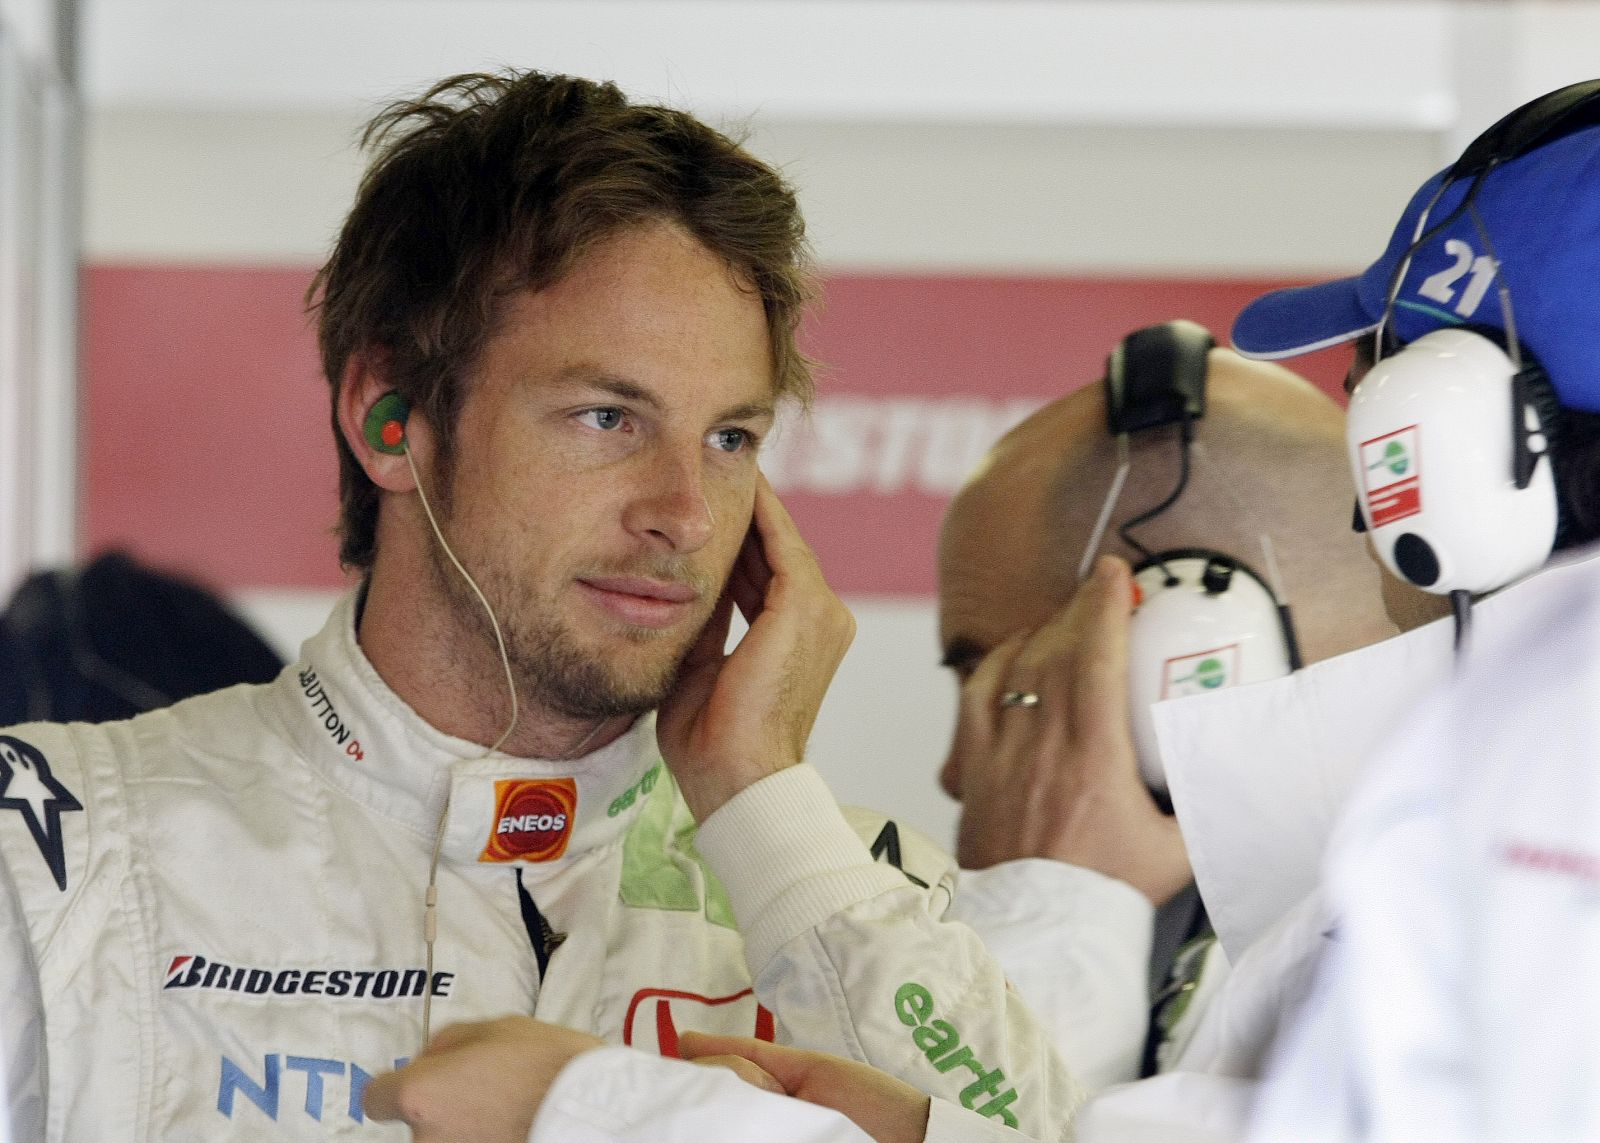 Honda F1 driver Jenson Button of England listens to his mechanic during a testing session at the Catalonia racetrack in Montmelo